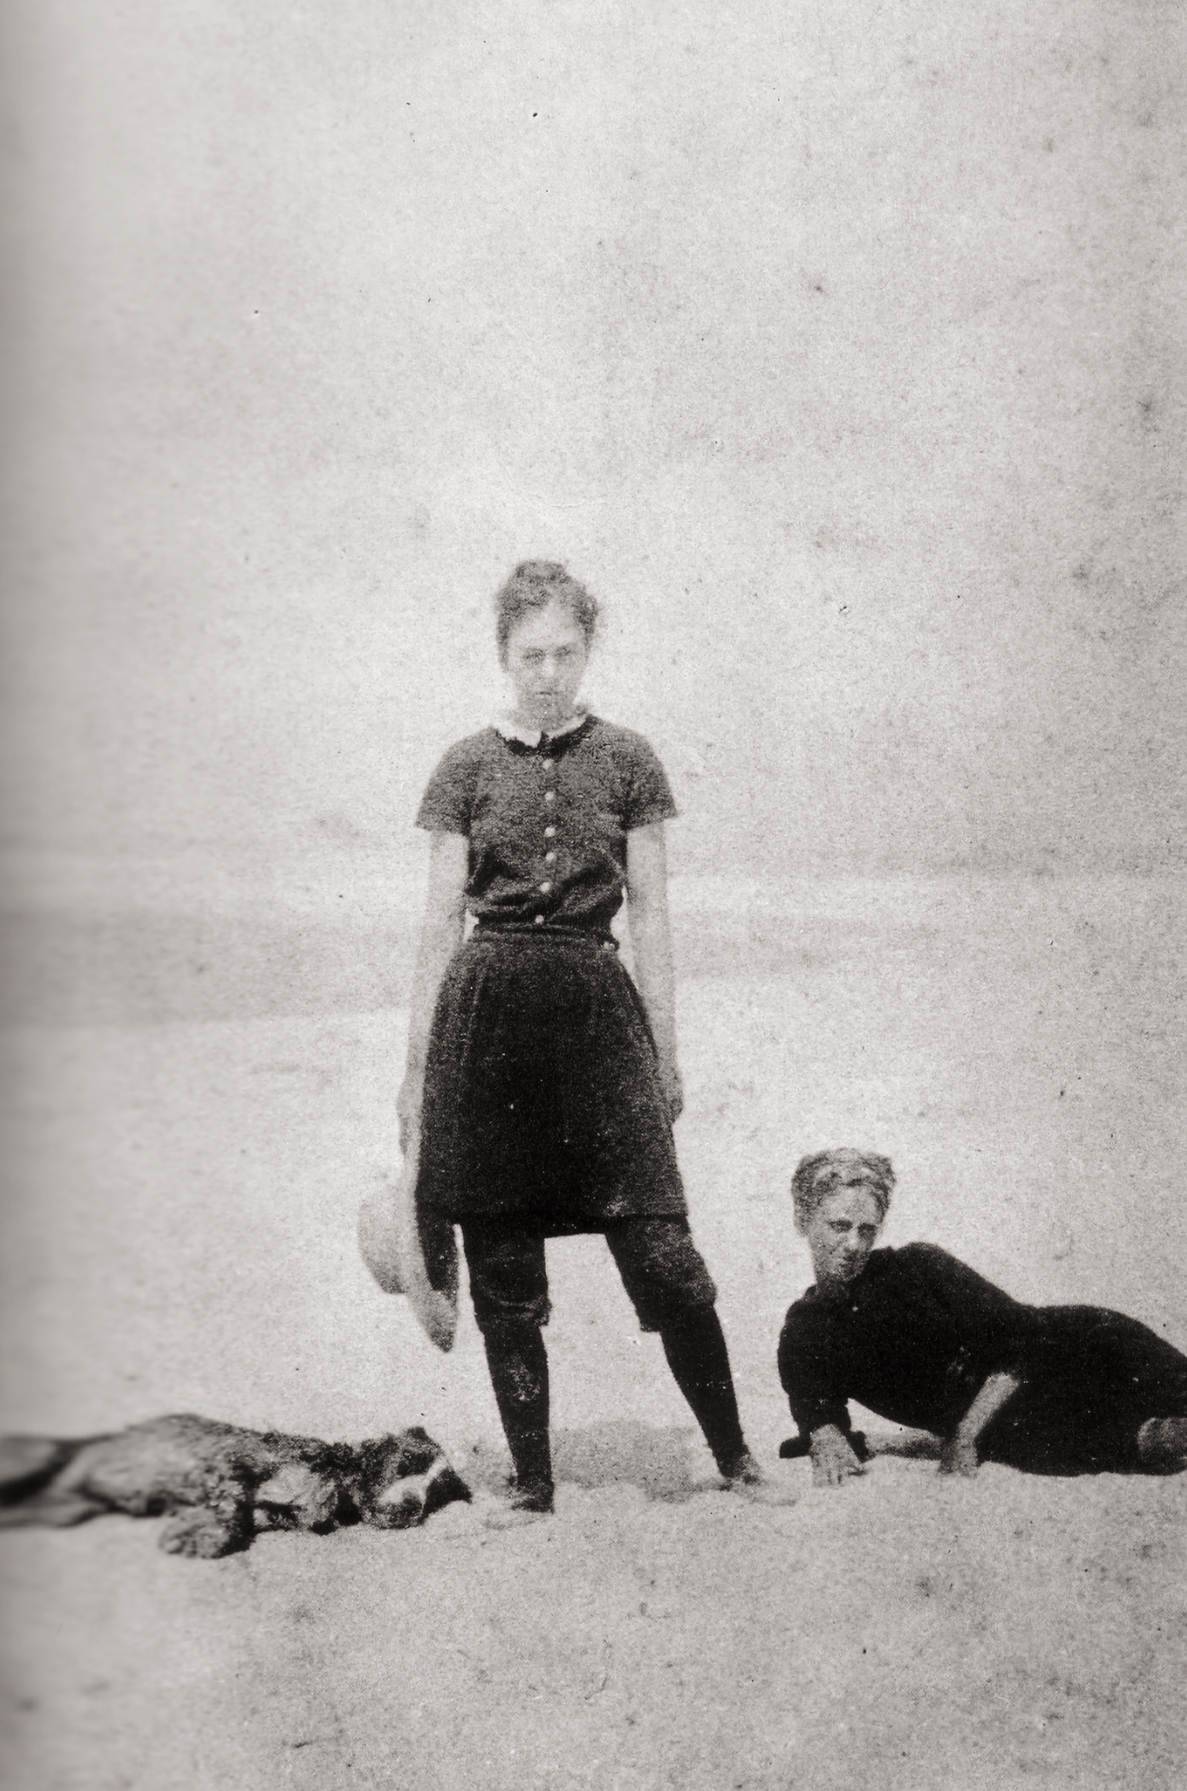 Margaret Eakins and Harry at the Beach by Thomas Eakins - 1880 - Postcard